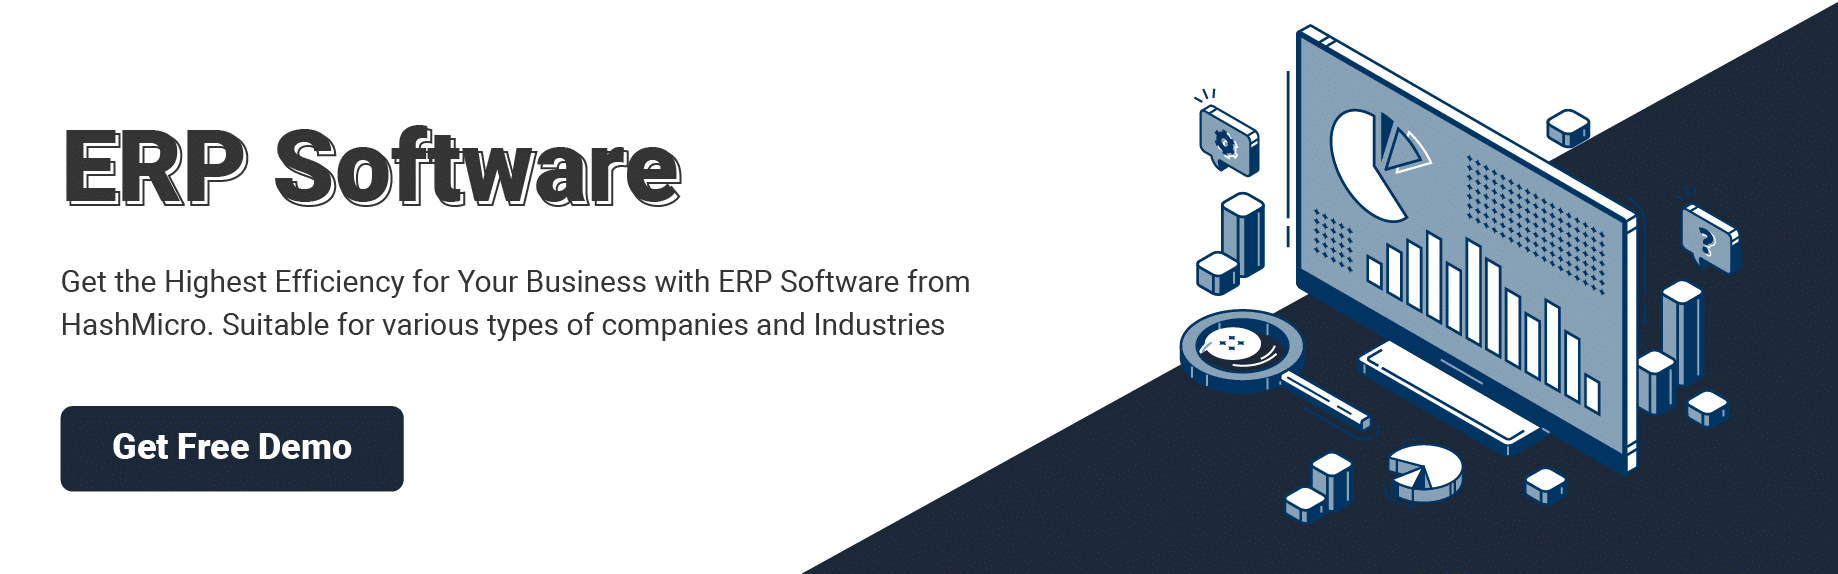 increase management ability with ERP software